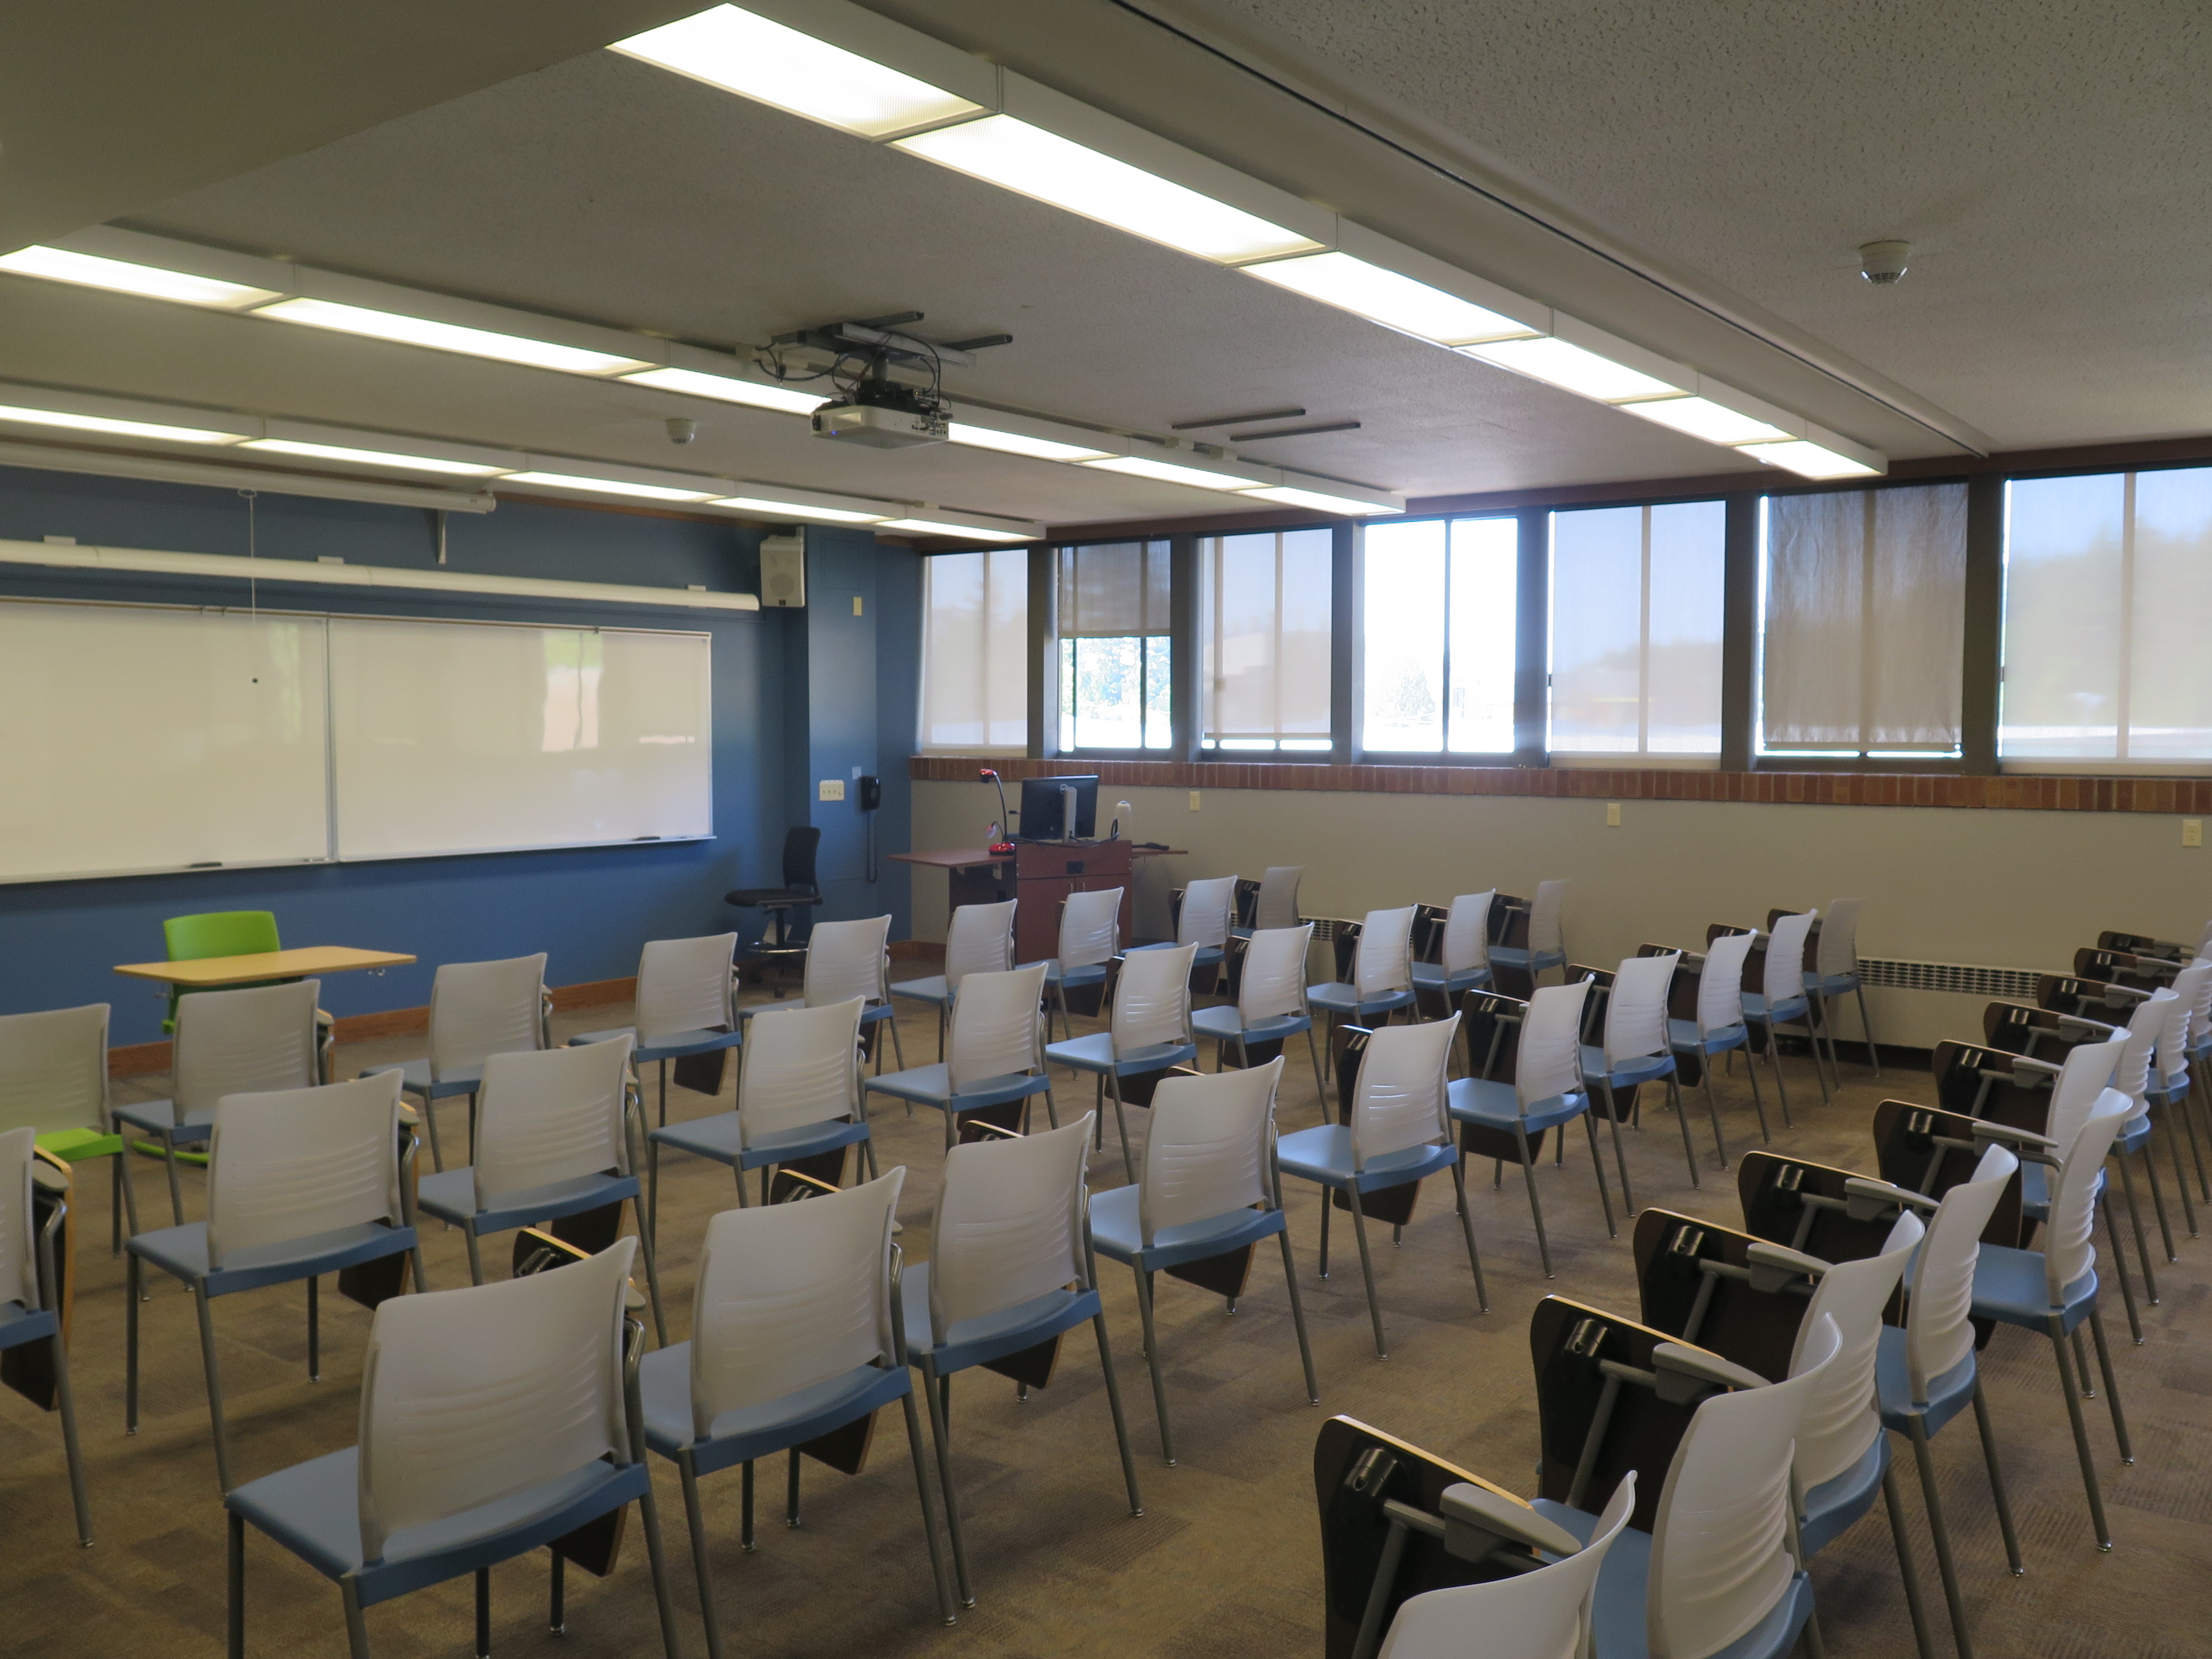 This room contains carpet floor, Moveable Tablet armchairs, whiteboard at the front of the room and a podium. 